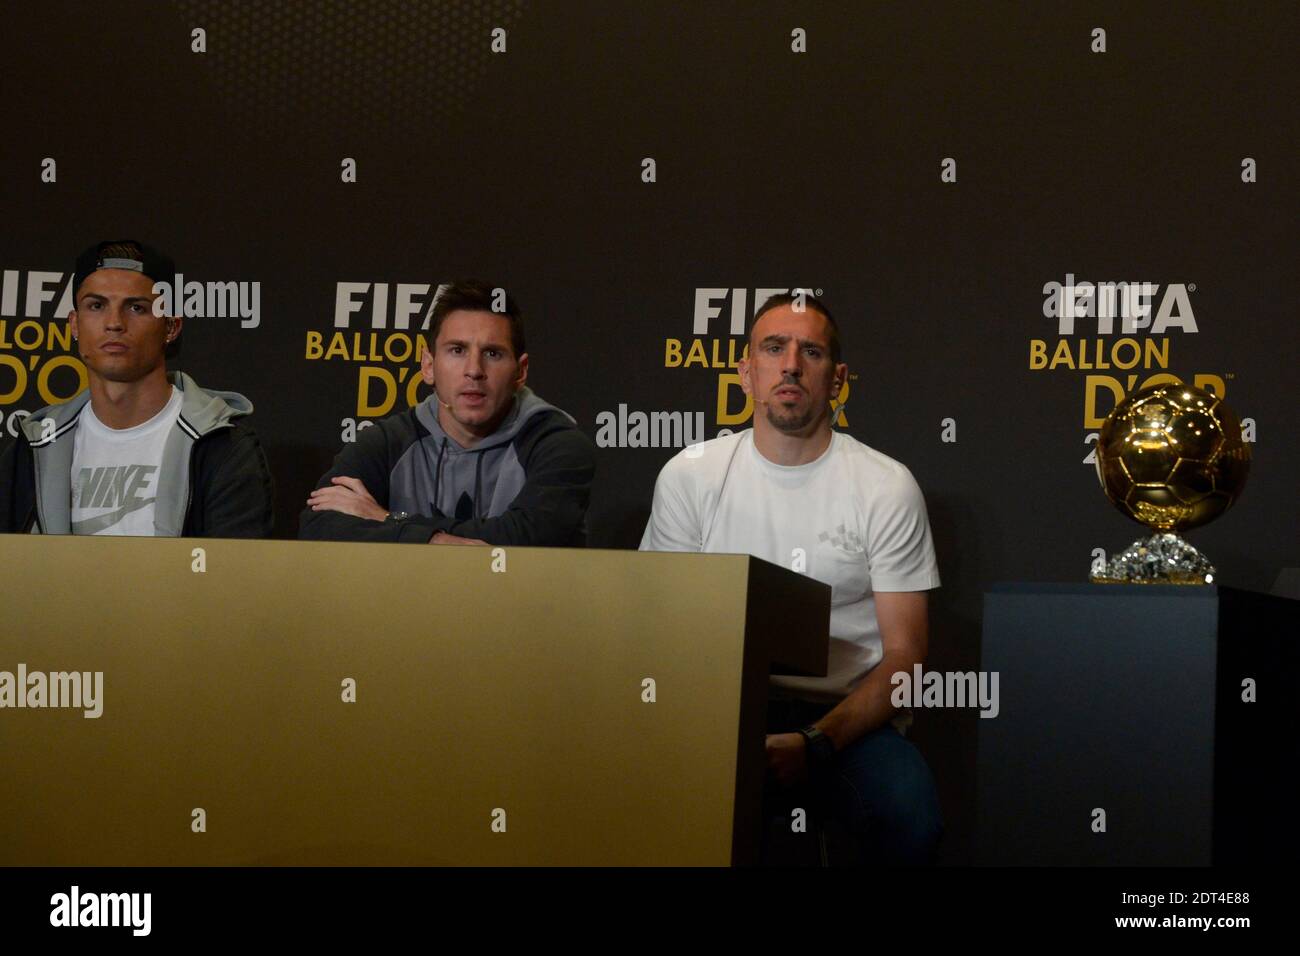 FIFA Golden Ball 2013's Press Conference of Cristiano Ronaldo, Messi and Franck Ribery in Congress House, Zurich, Switzerland on January 13th, 2014. Photo by Henri Szwarc/ABACAPRESS.COM Stock Photo